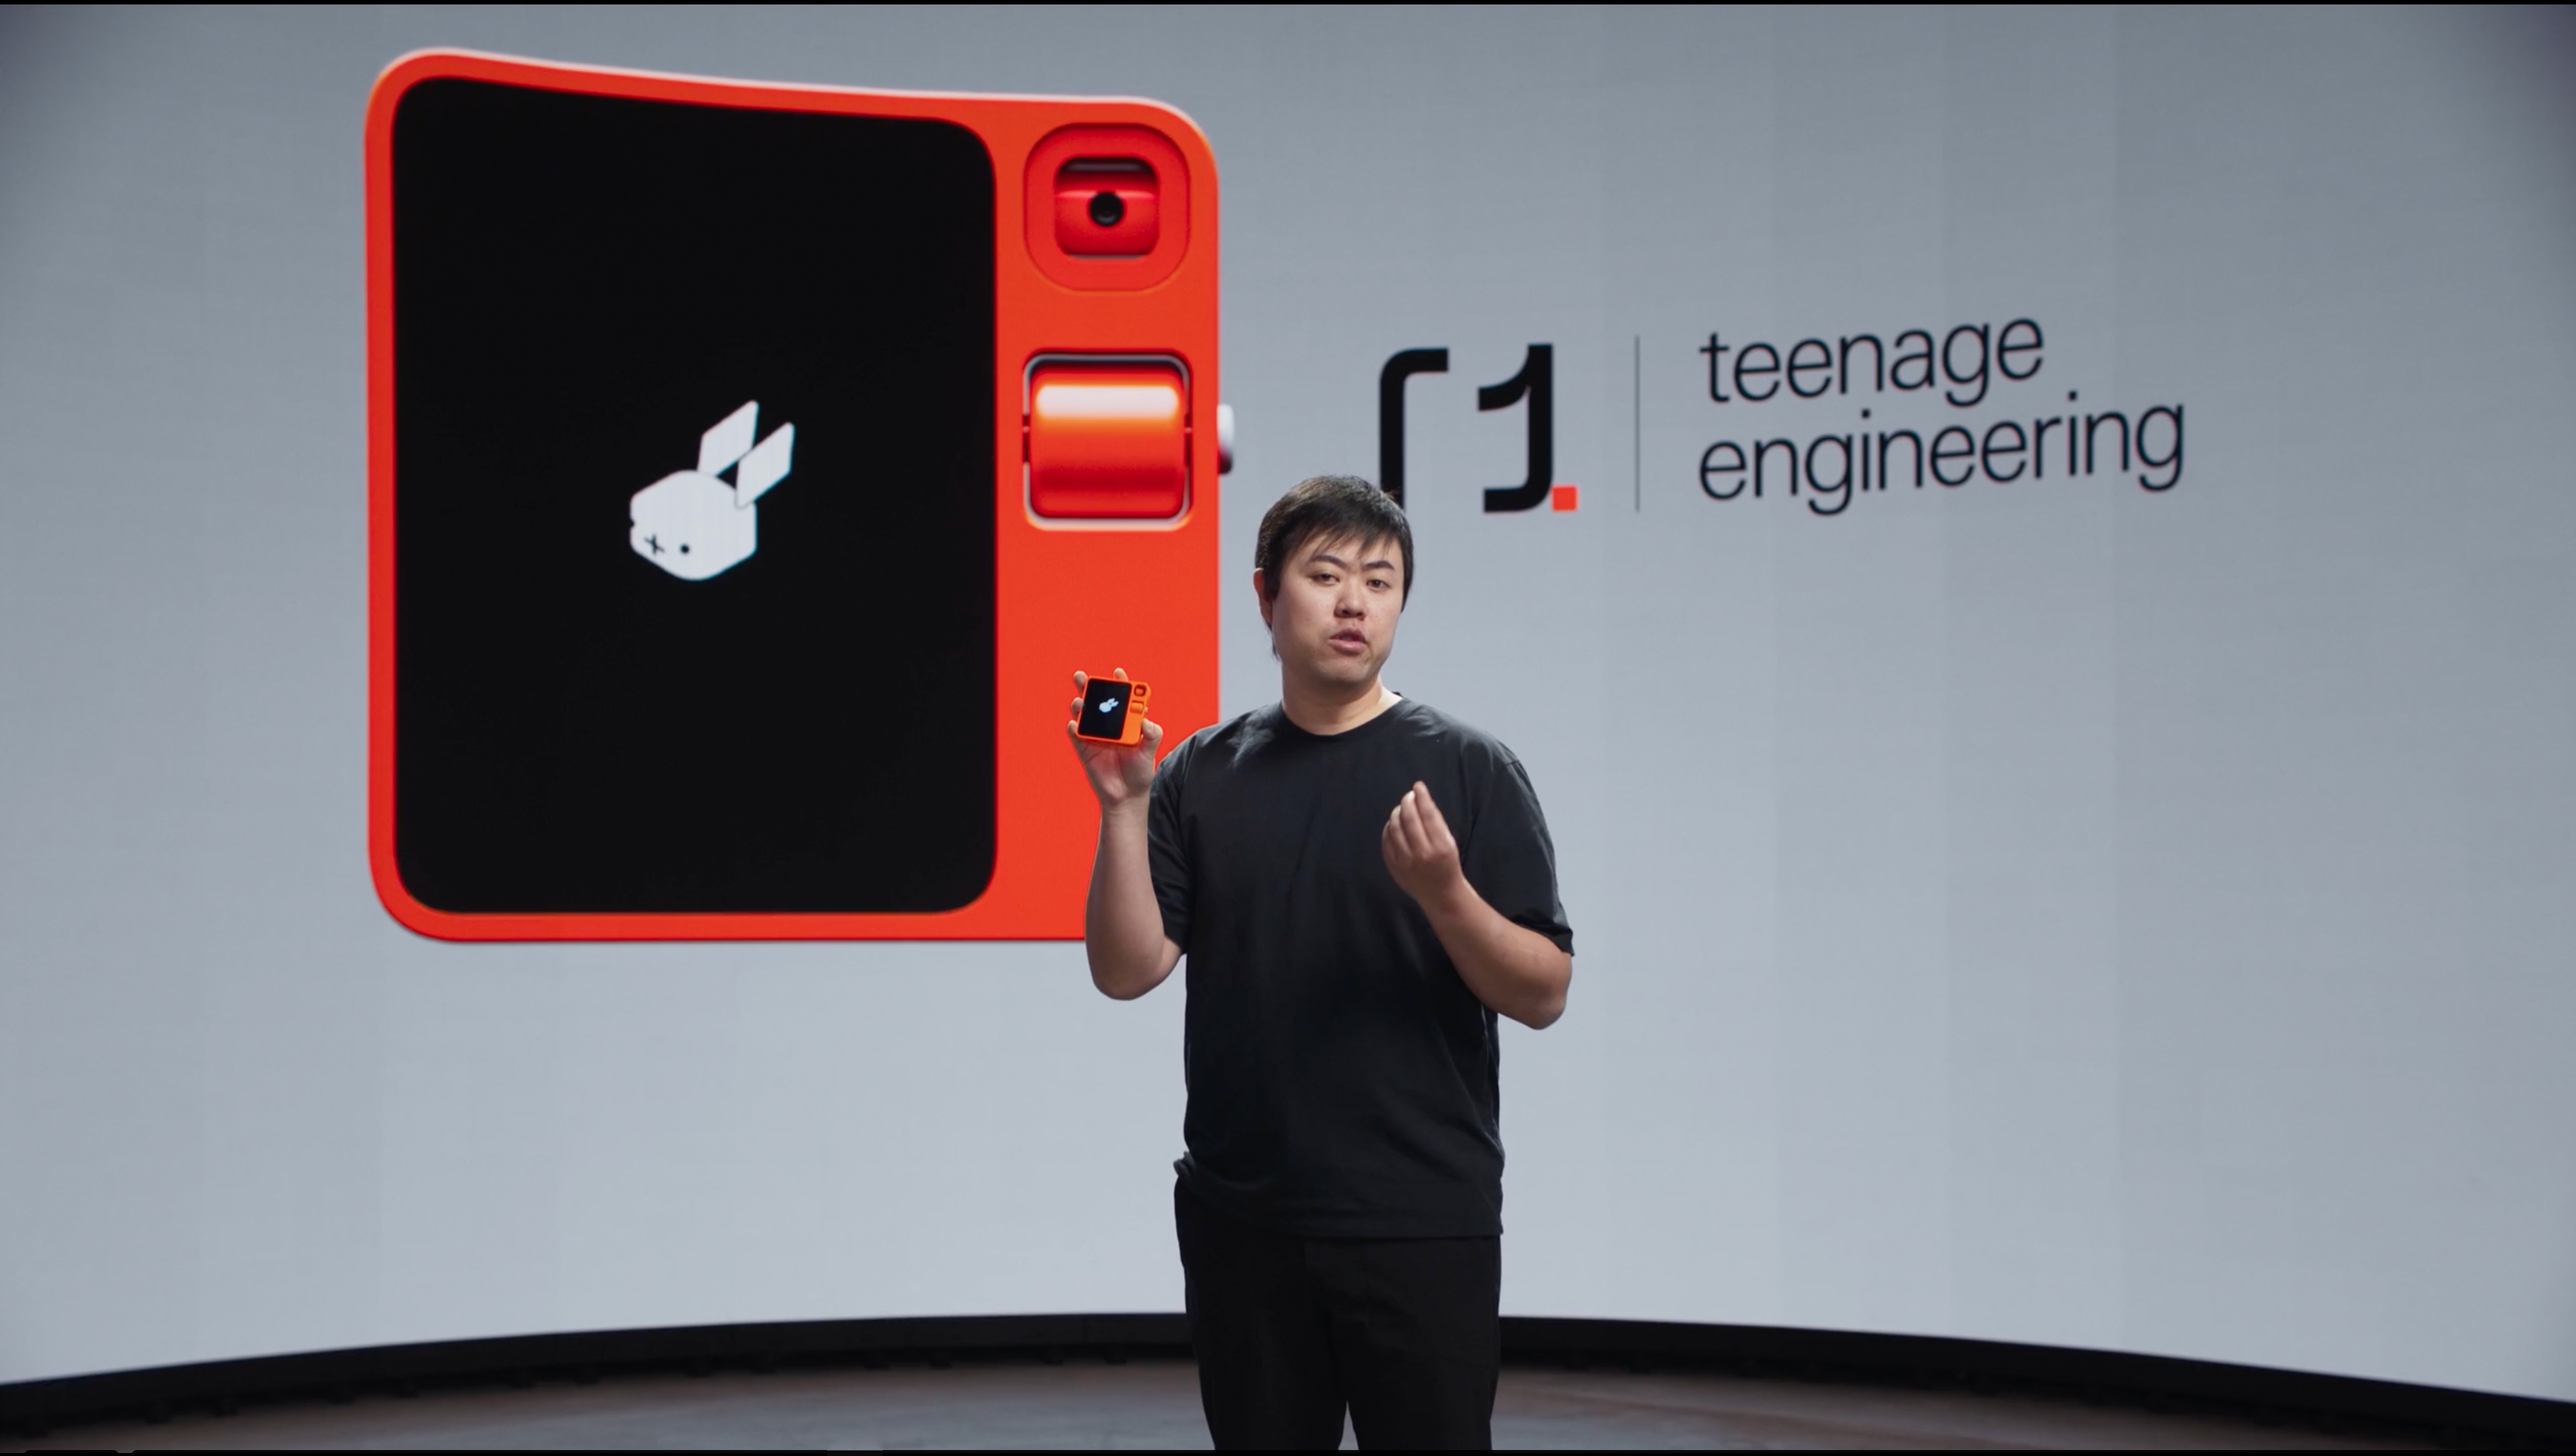 Jesse Lyu holding the Rabbit R1, designed in collaboration between Rabbit and Teenage Engineering